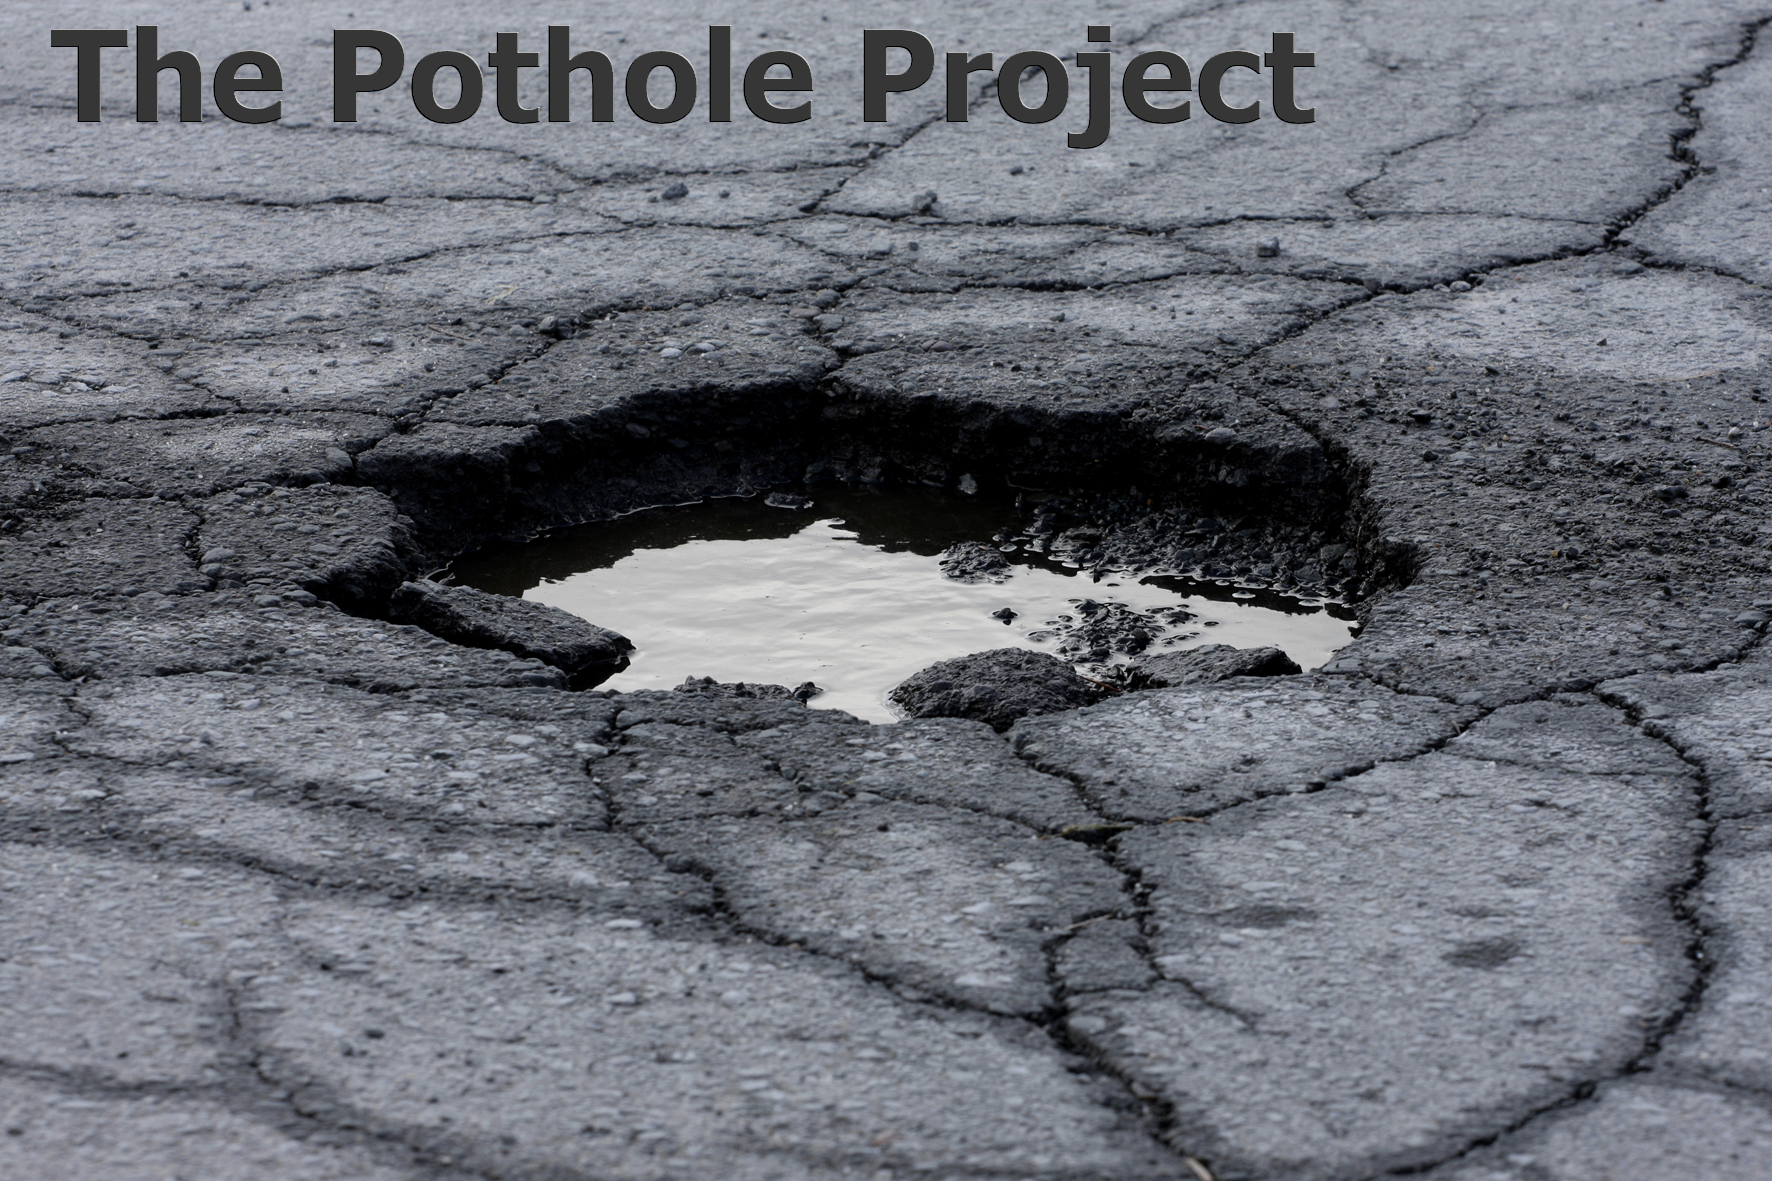 Potholes account for thousands of dollars in damages